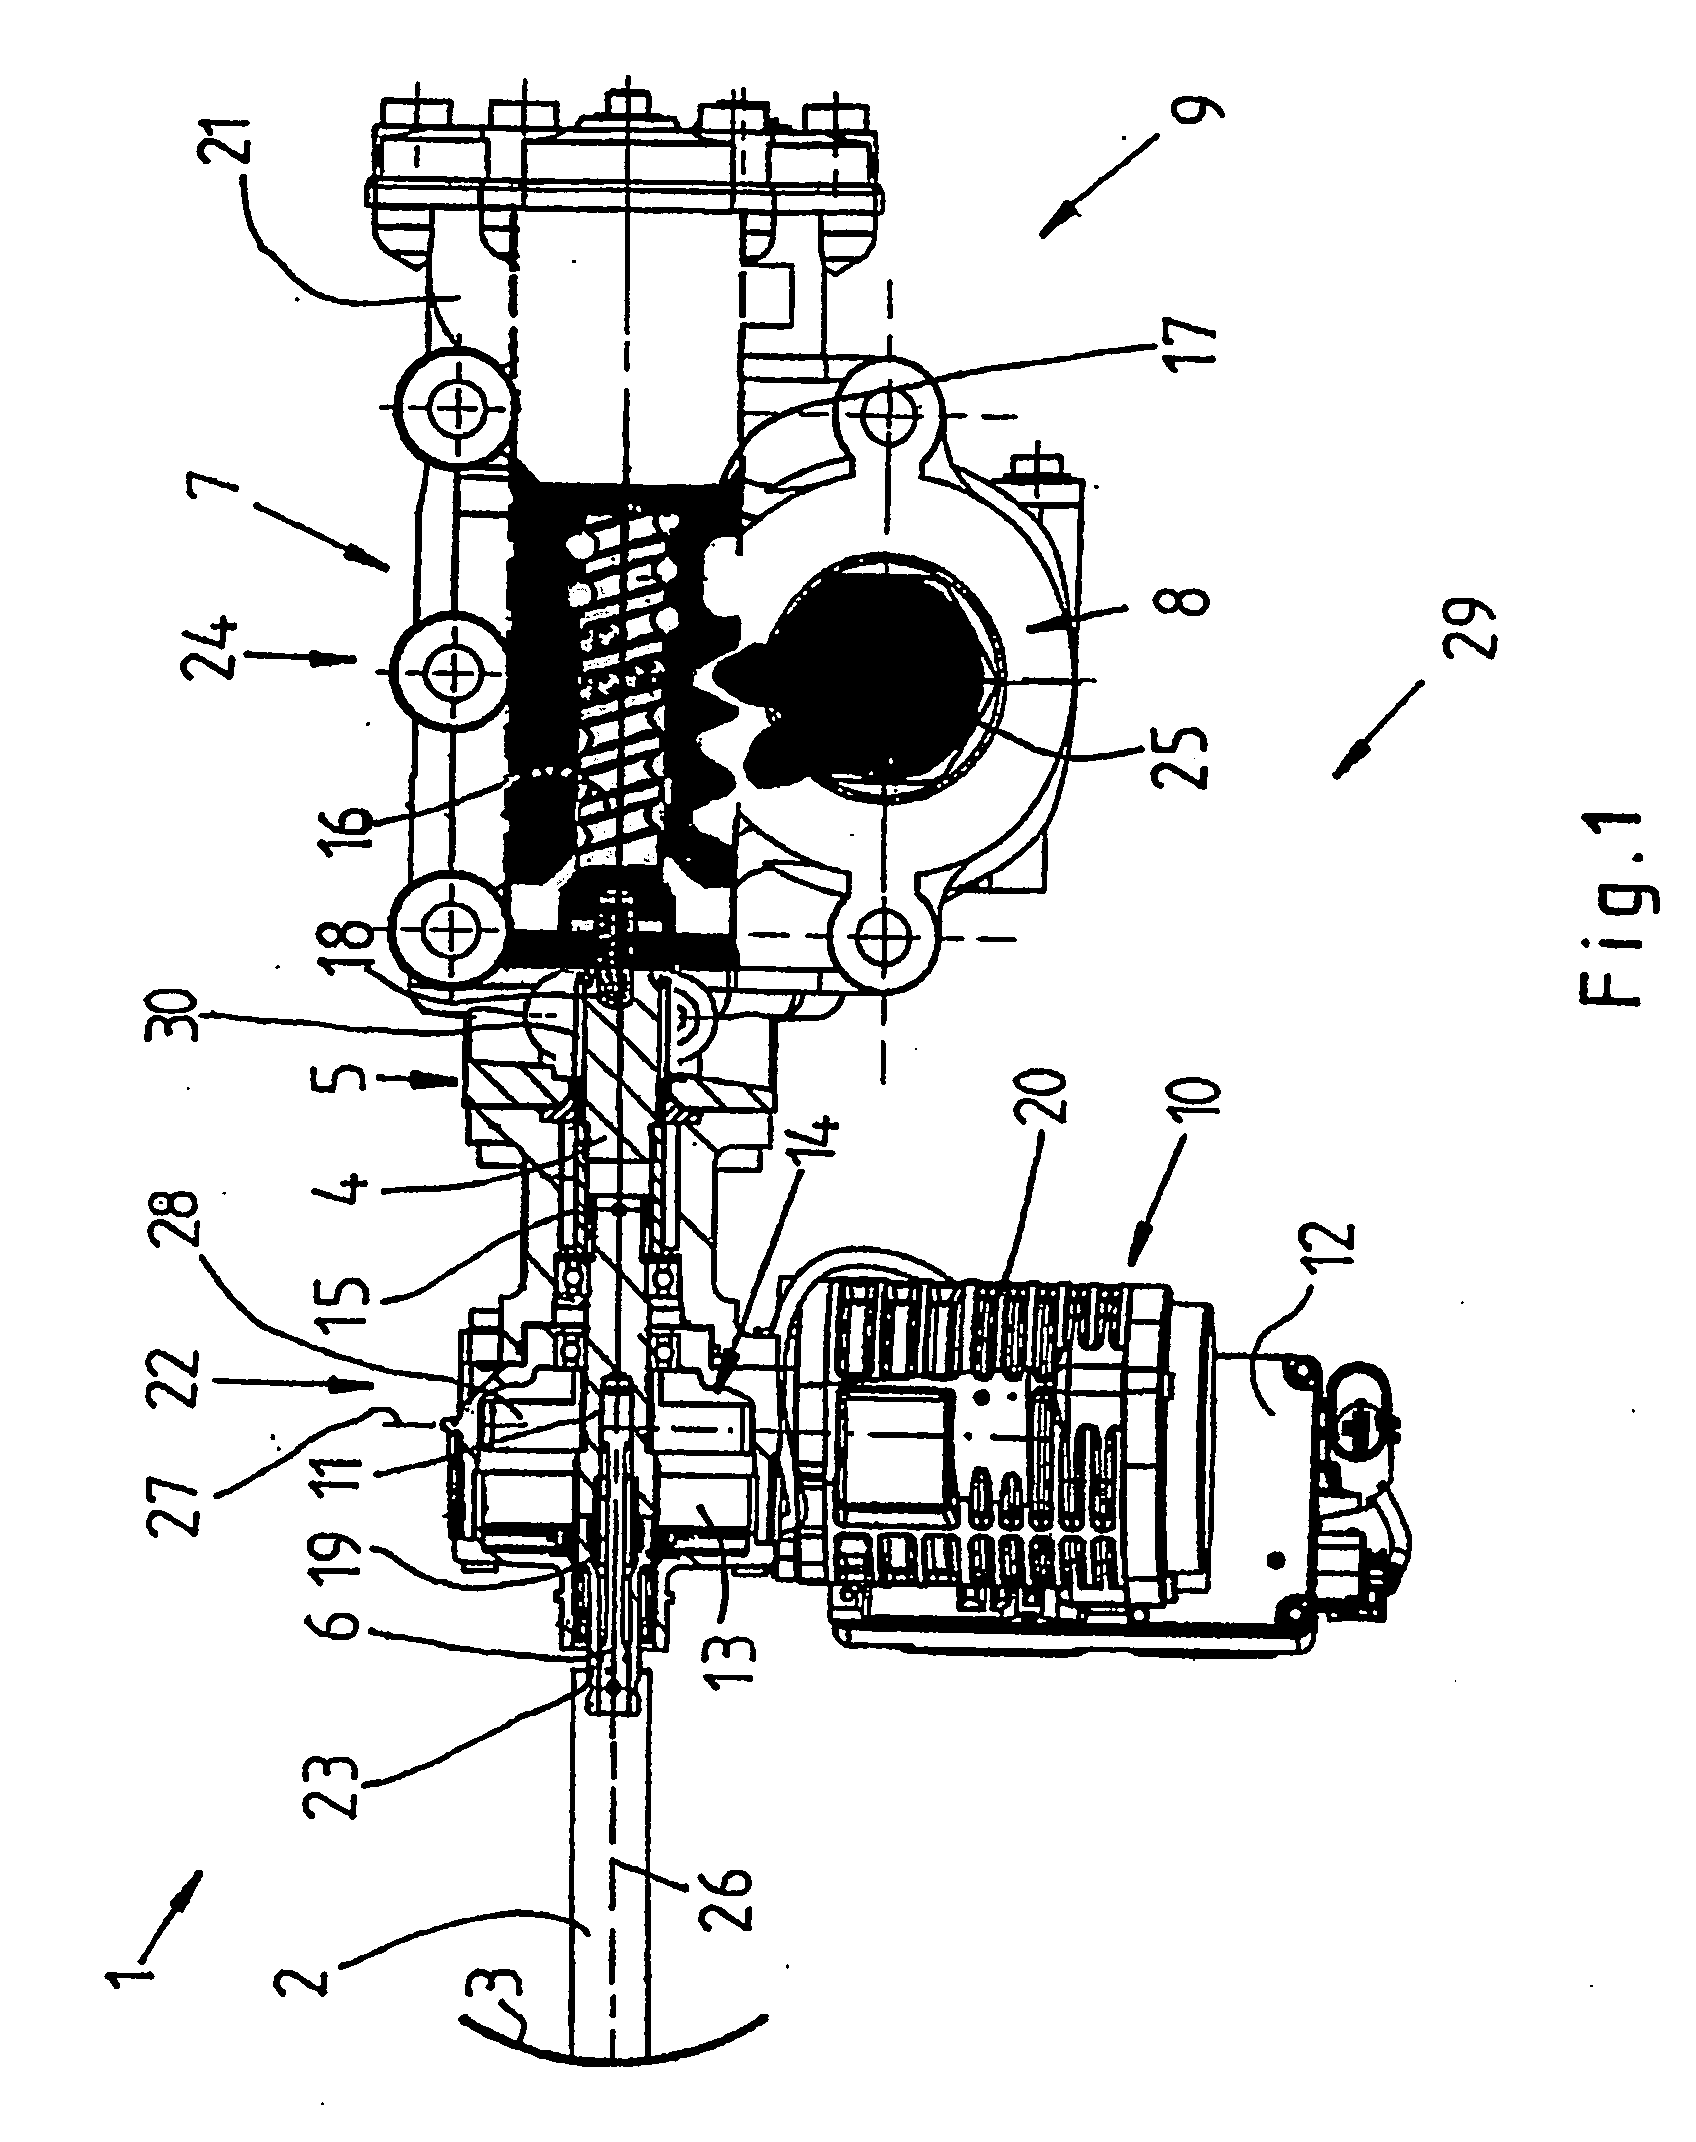 Steering system for a vehicle